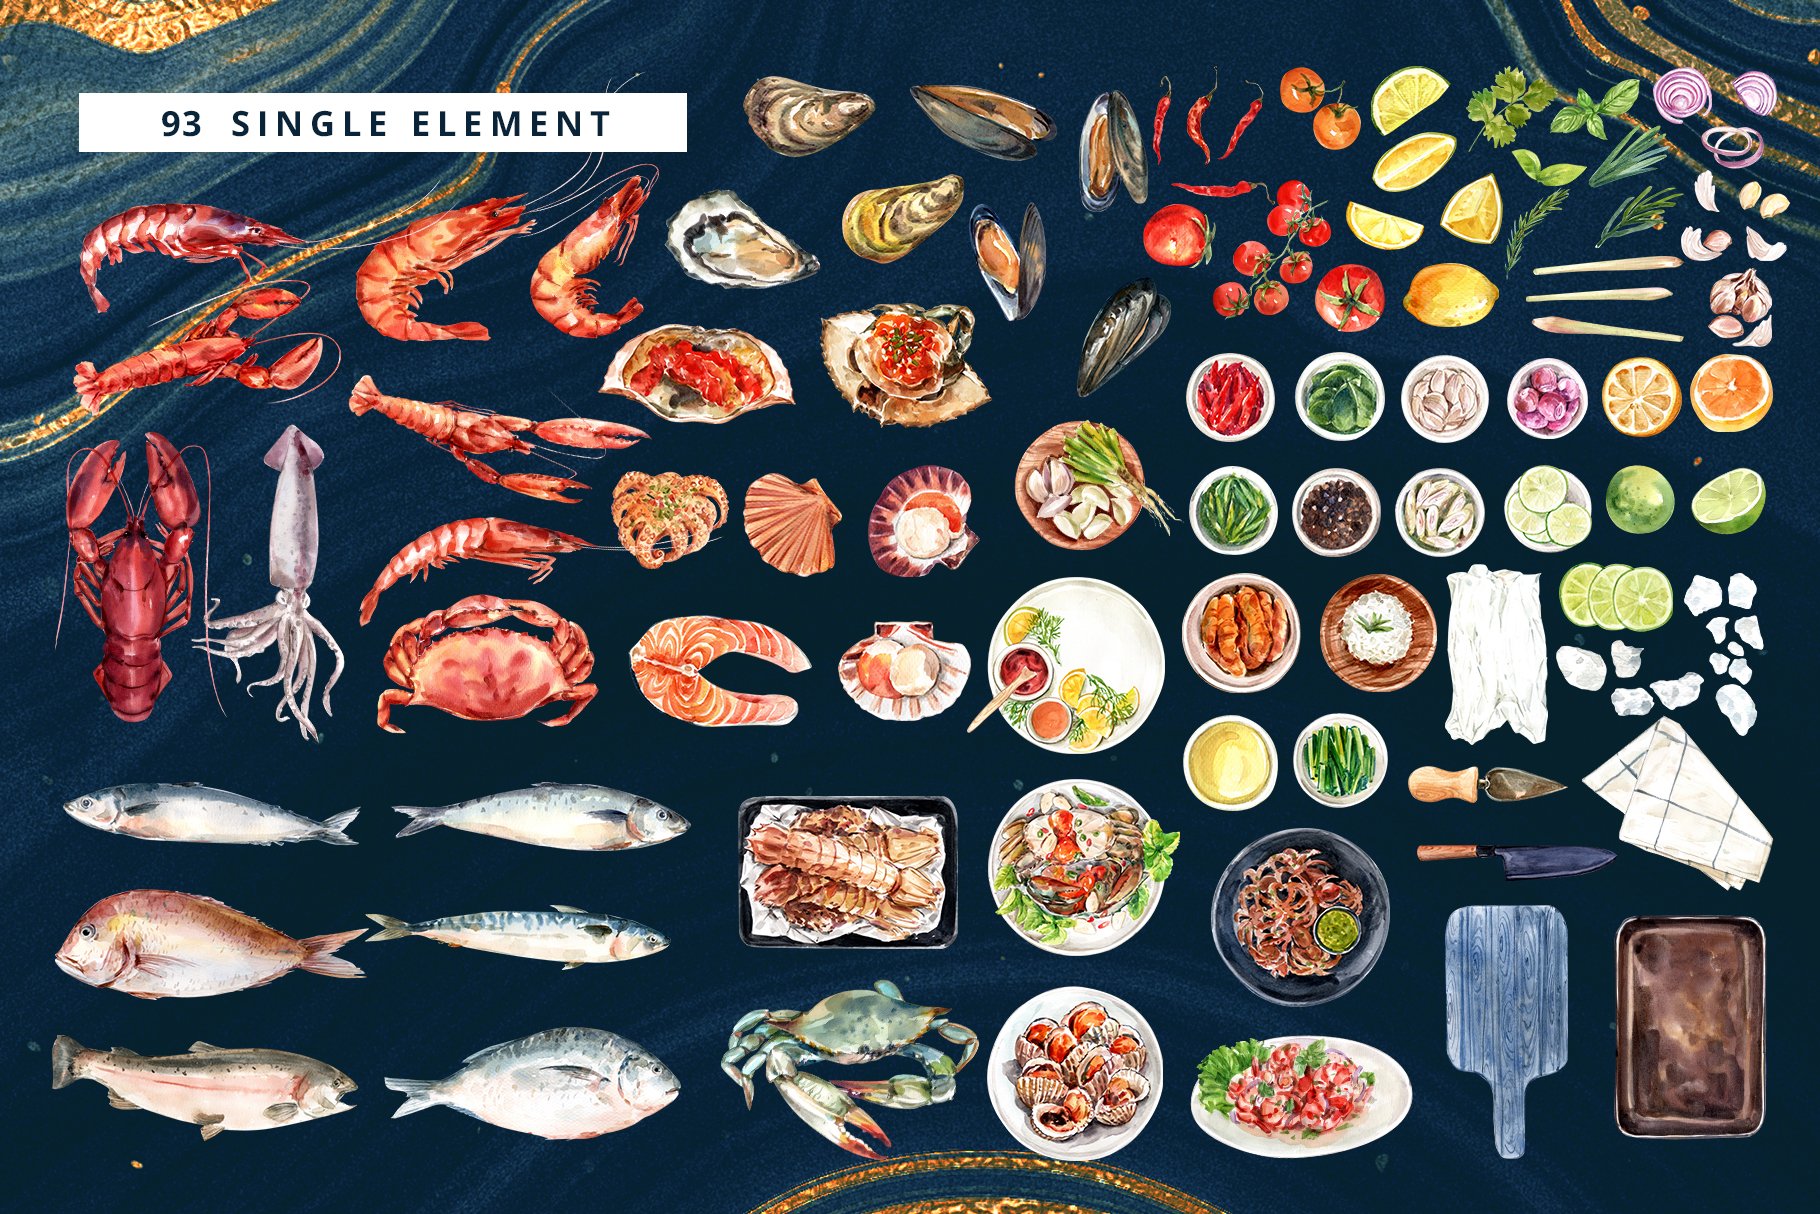 A lot of the seafood elements.